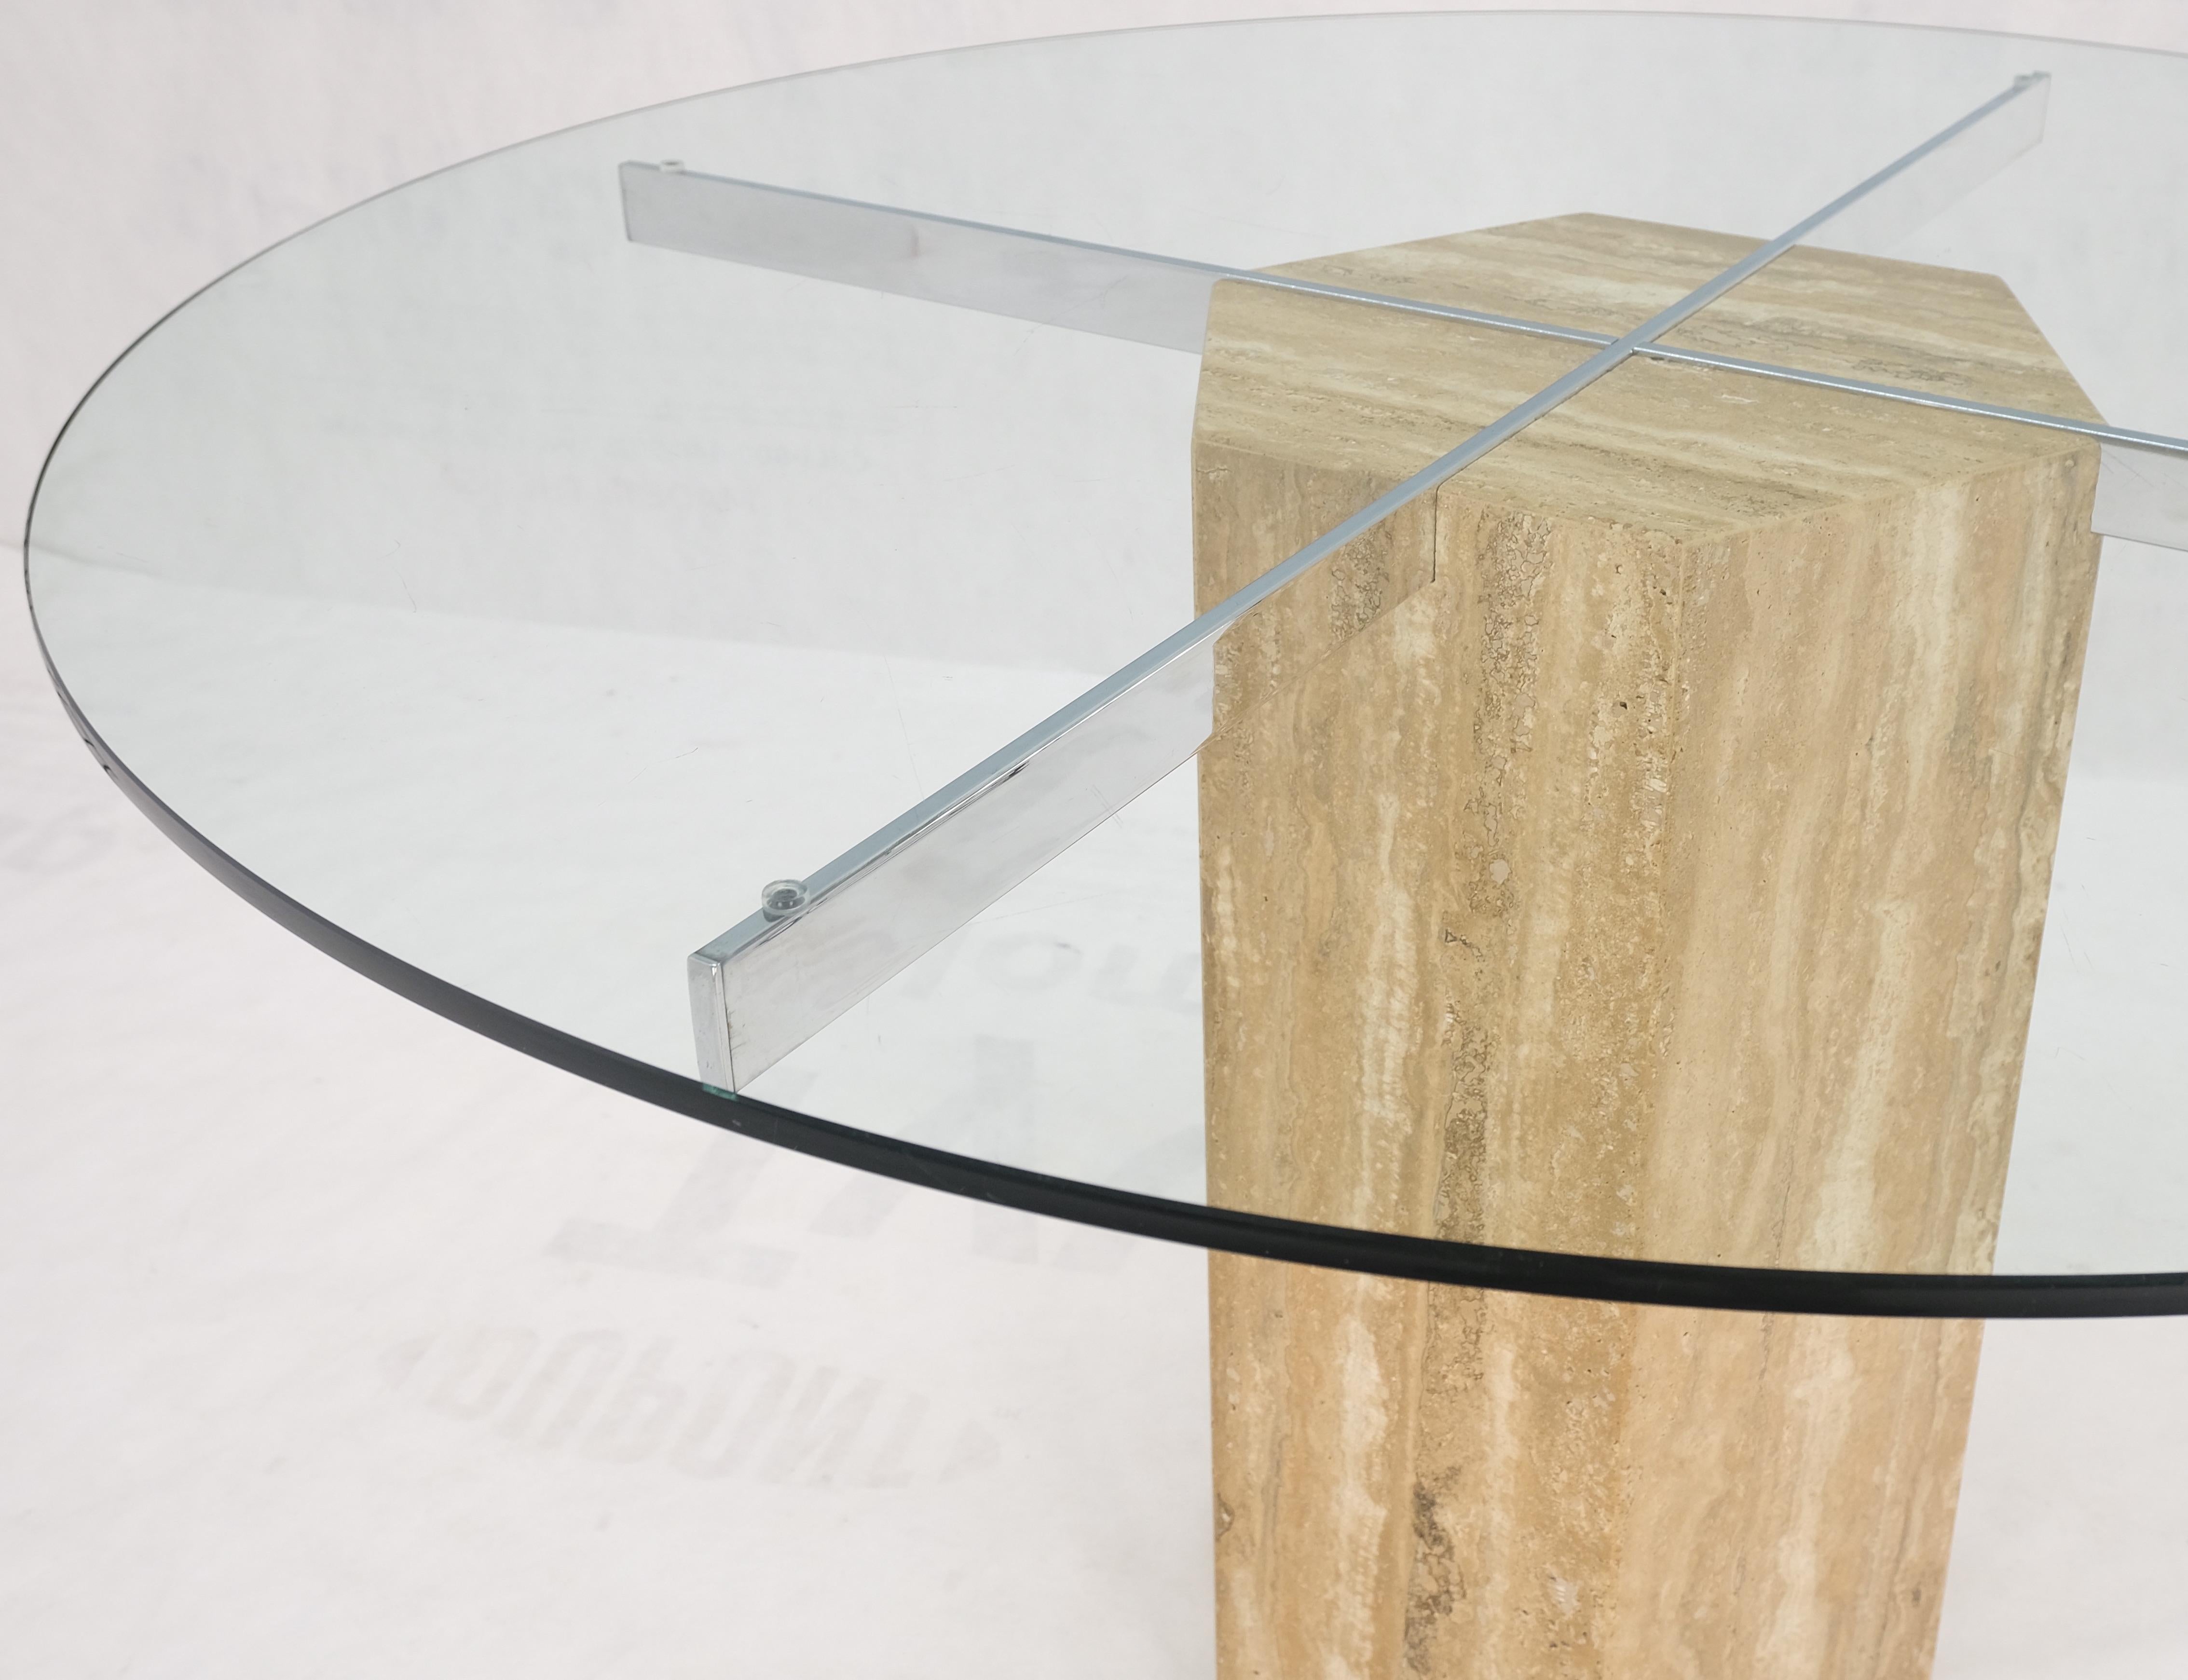 hexagon glass dining table